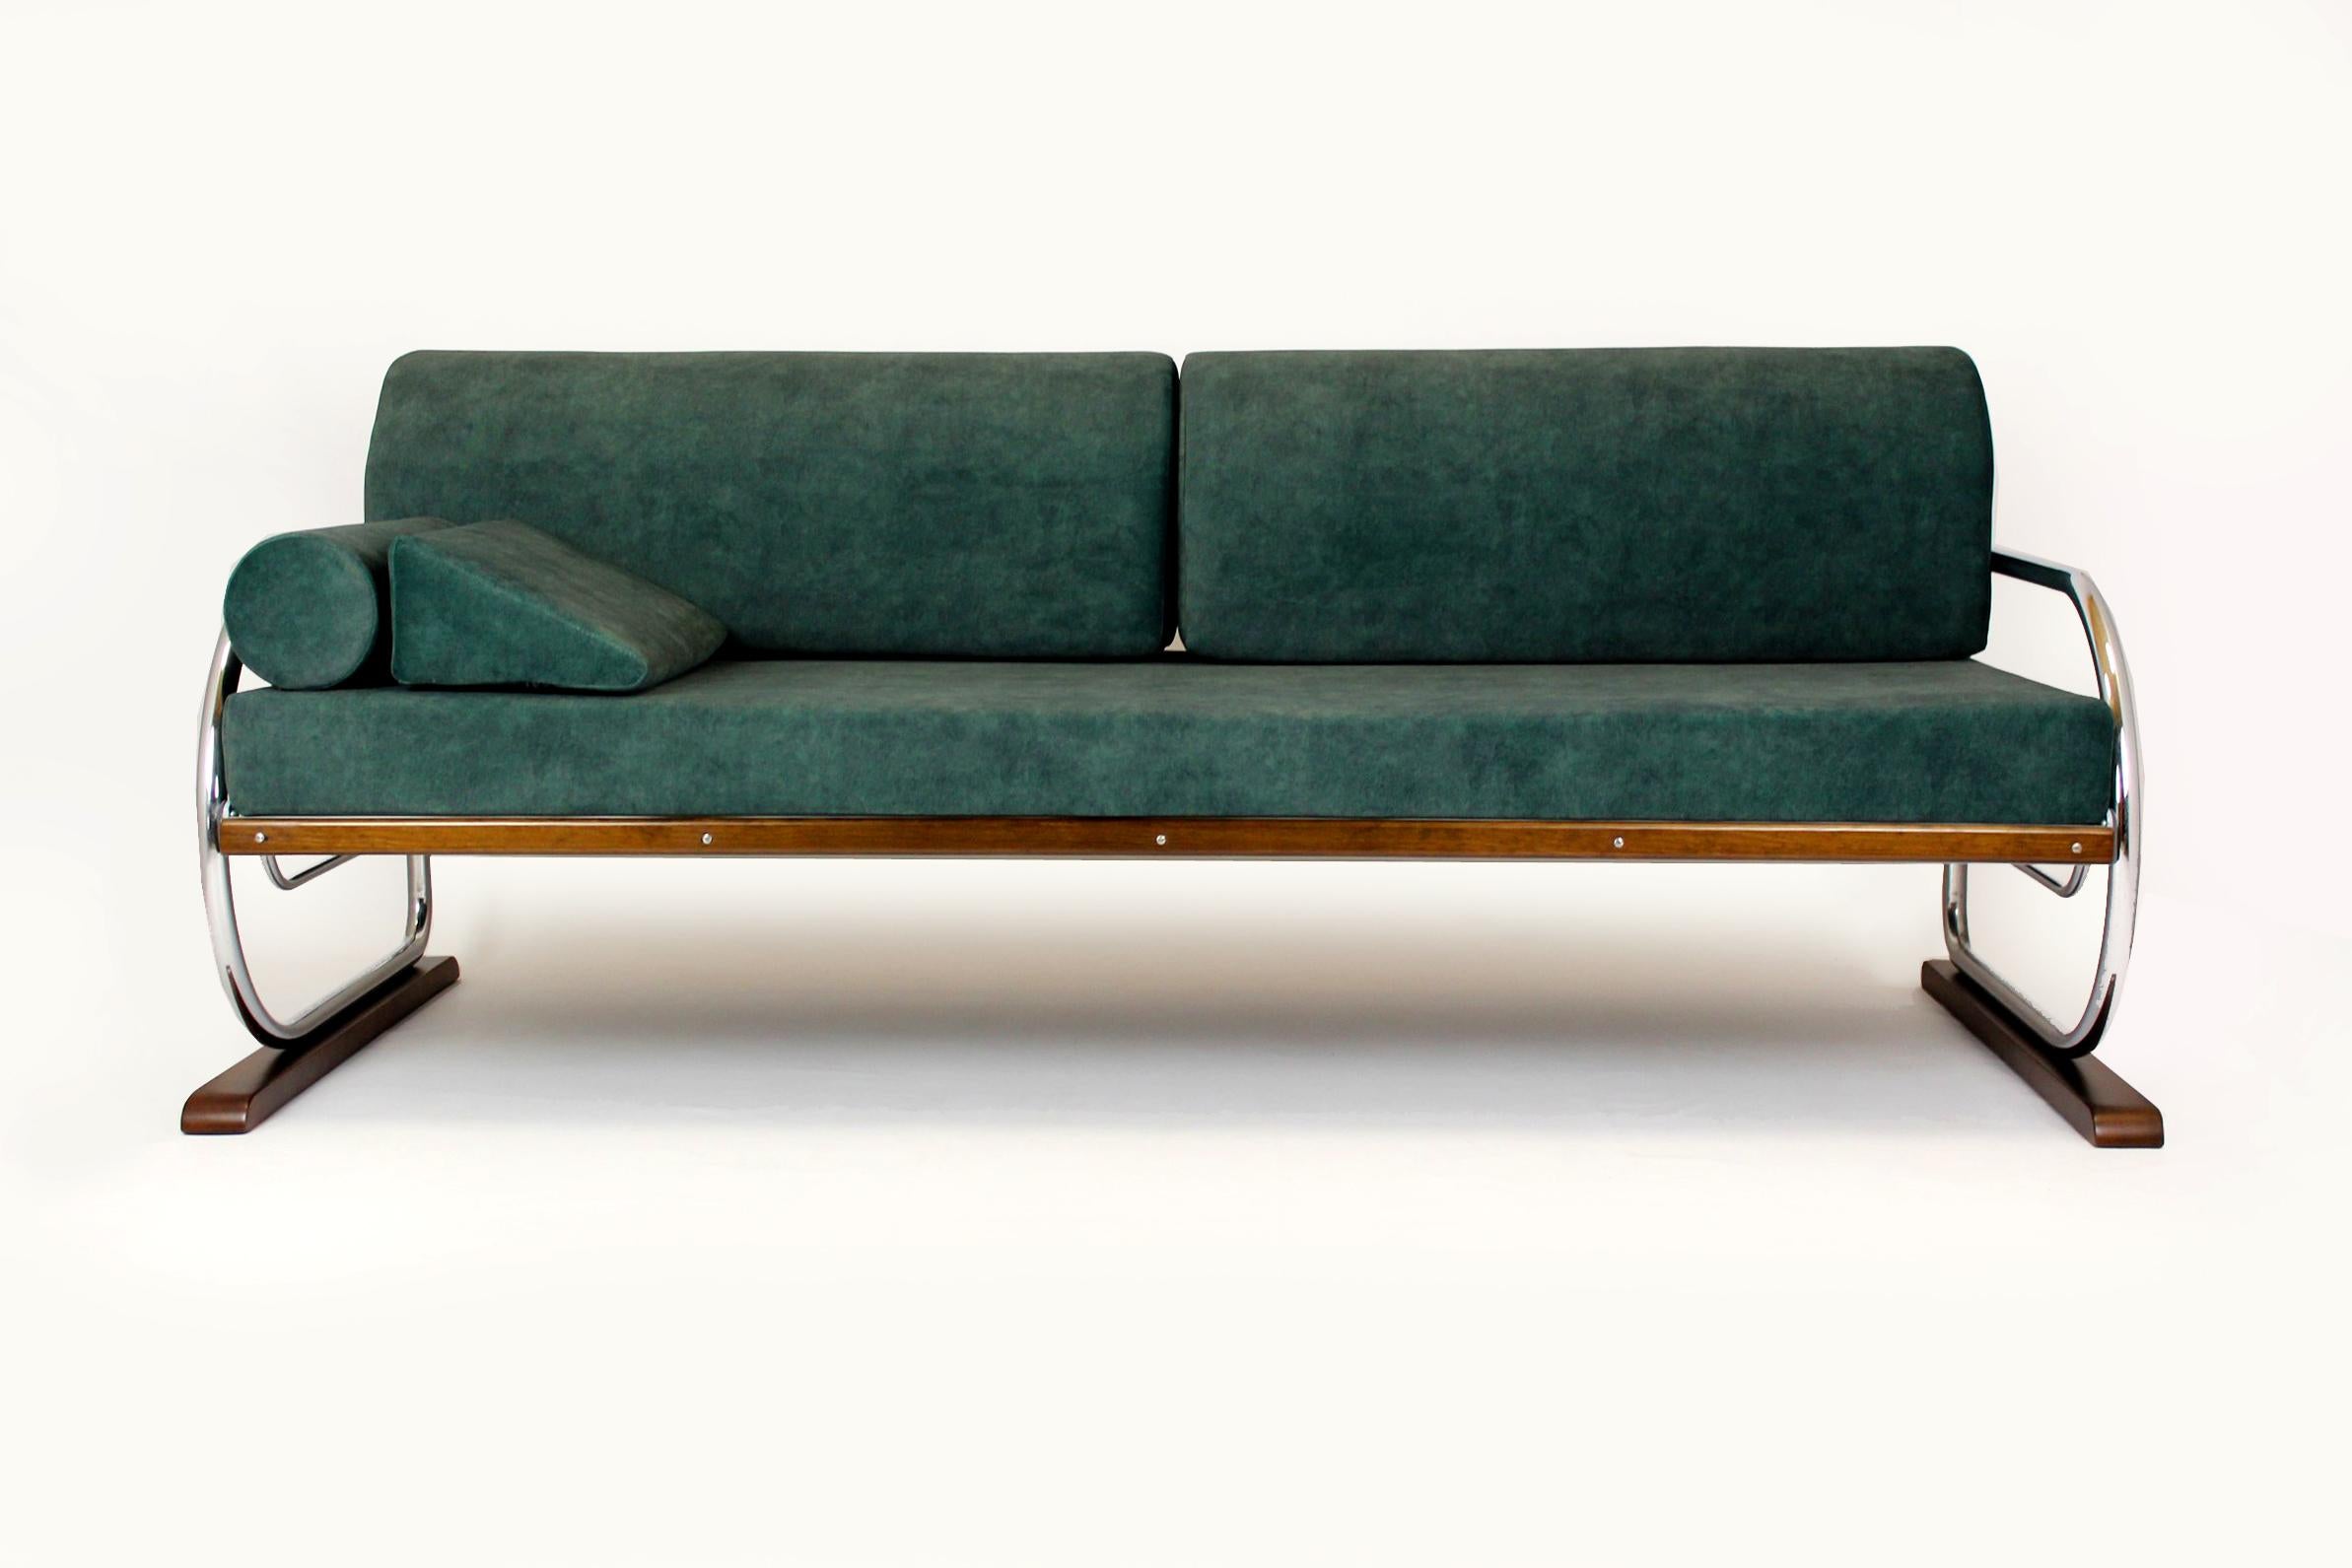 This Bauhaus style sofa was produced by Hynek Gottwald in the 1930s. The sofa has been completely restored, it has brand new mattresses upholstered in easy-to-clean fabric. The woodwork has been lacquered, glossy finish. Chrome is in original, good